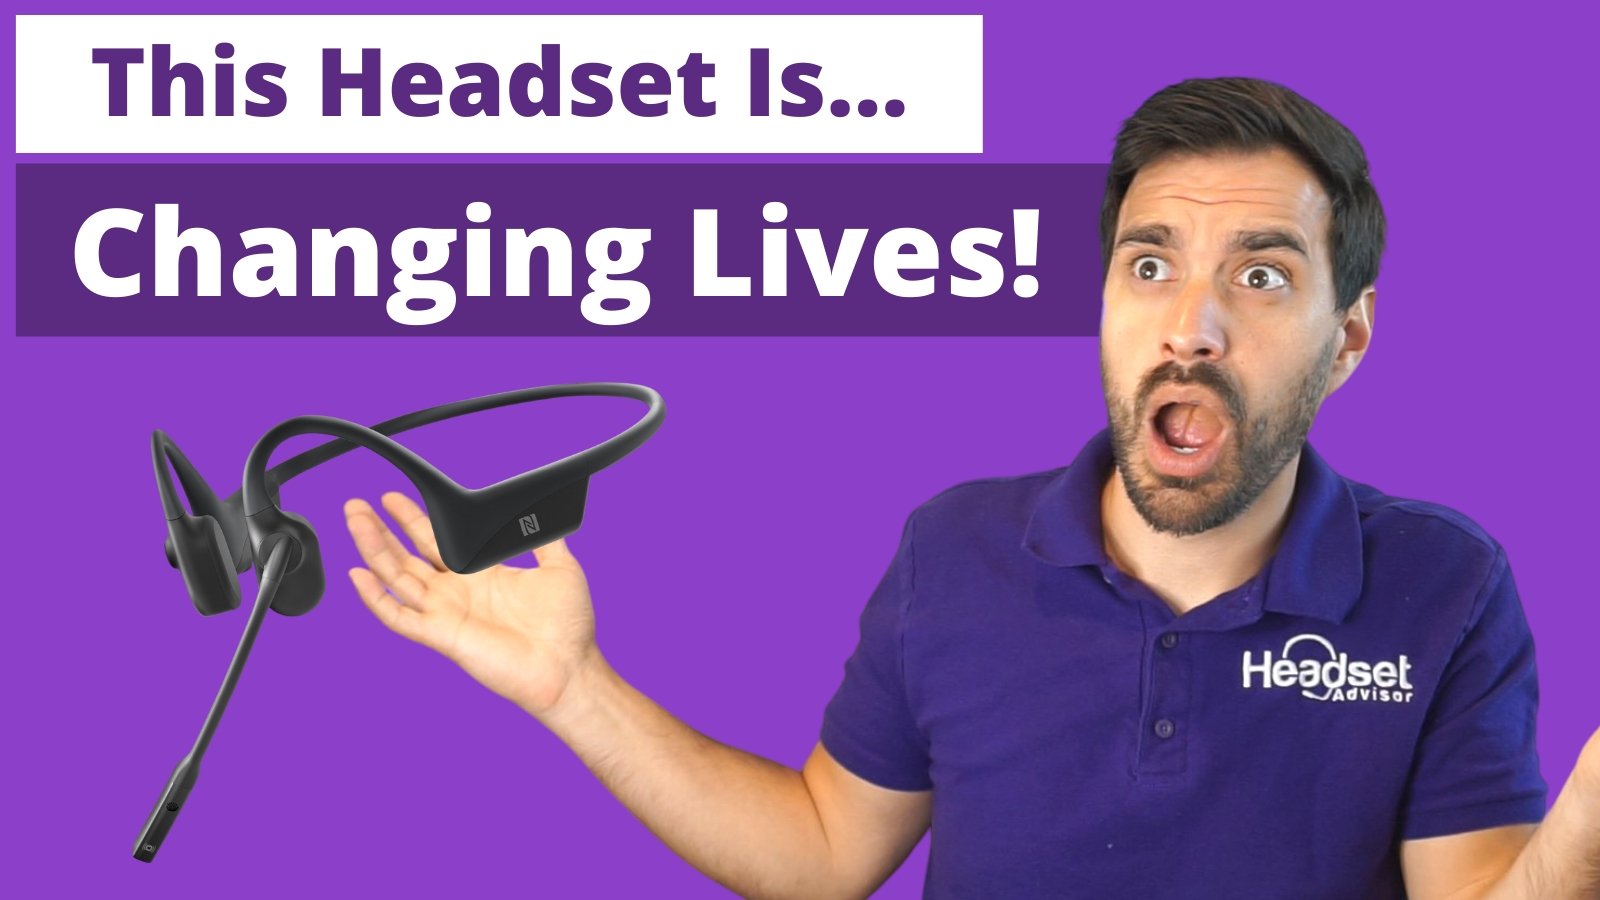 This Best Work Headset For Tinnitus Is Changing Lives - Headset Advisor